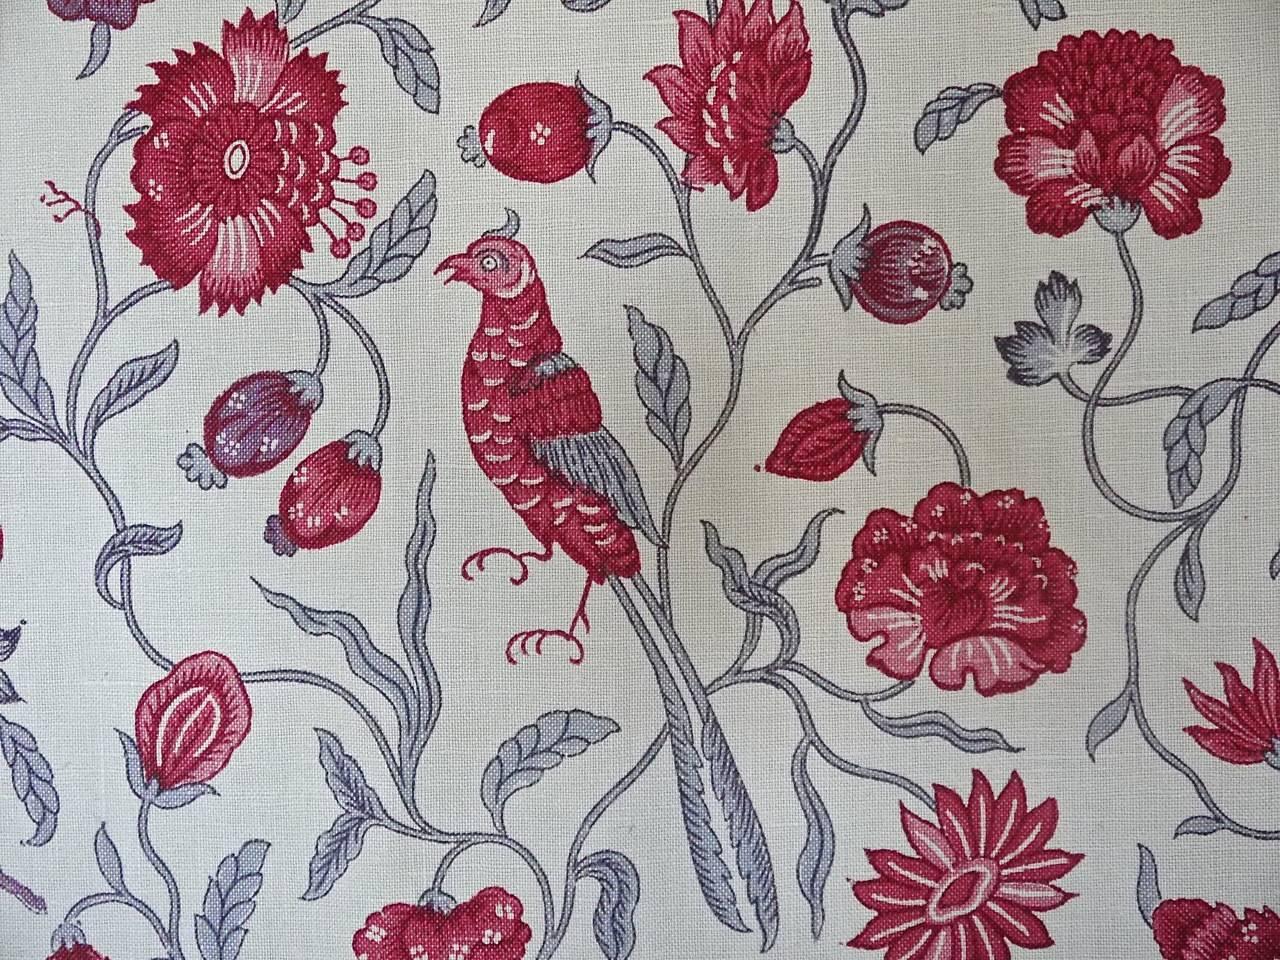 Early 20th Century French Printed Linen Panel with Stylised Birds and Flowers 1